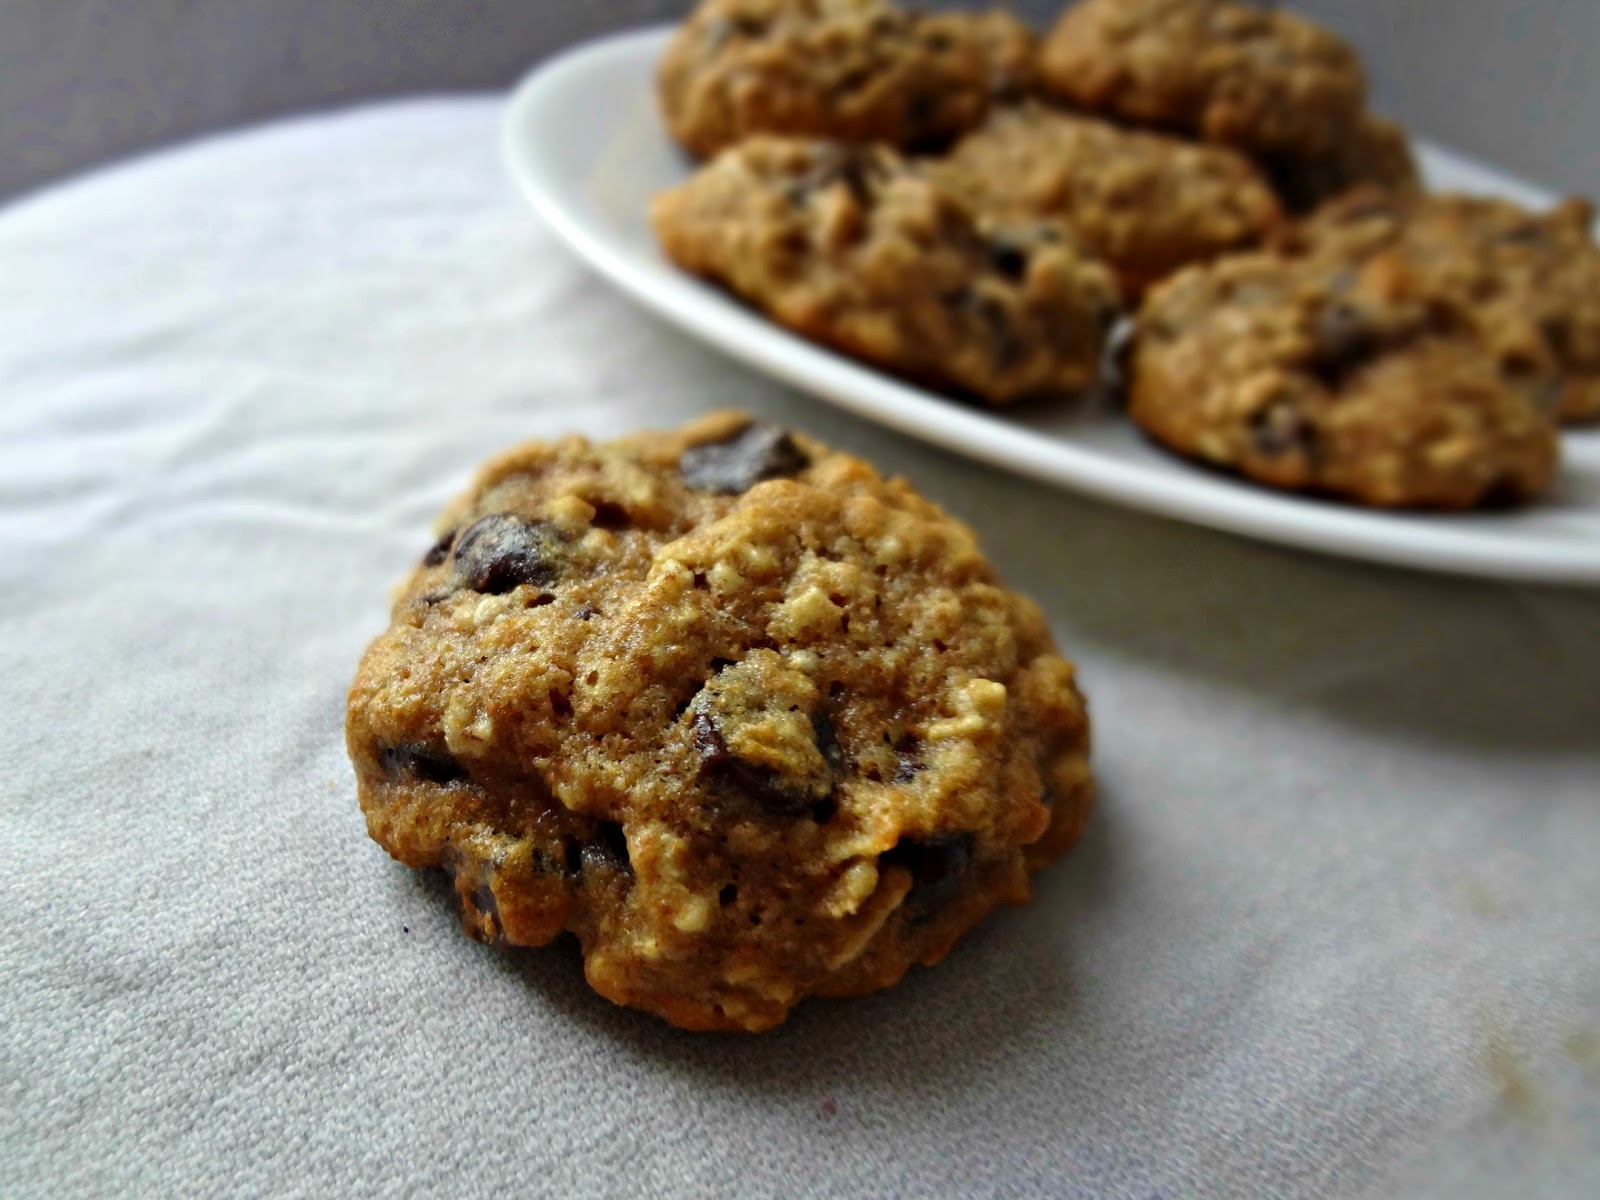 Oatmeal Chocolate Chip Cookies Healthy
 The Cooking Actress Healthy Oatmeal Chocolate Chip Cookies